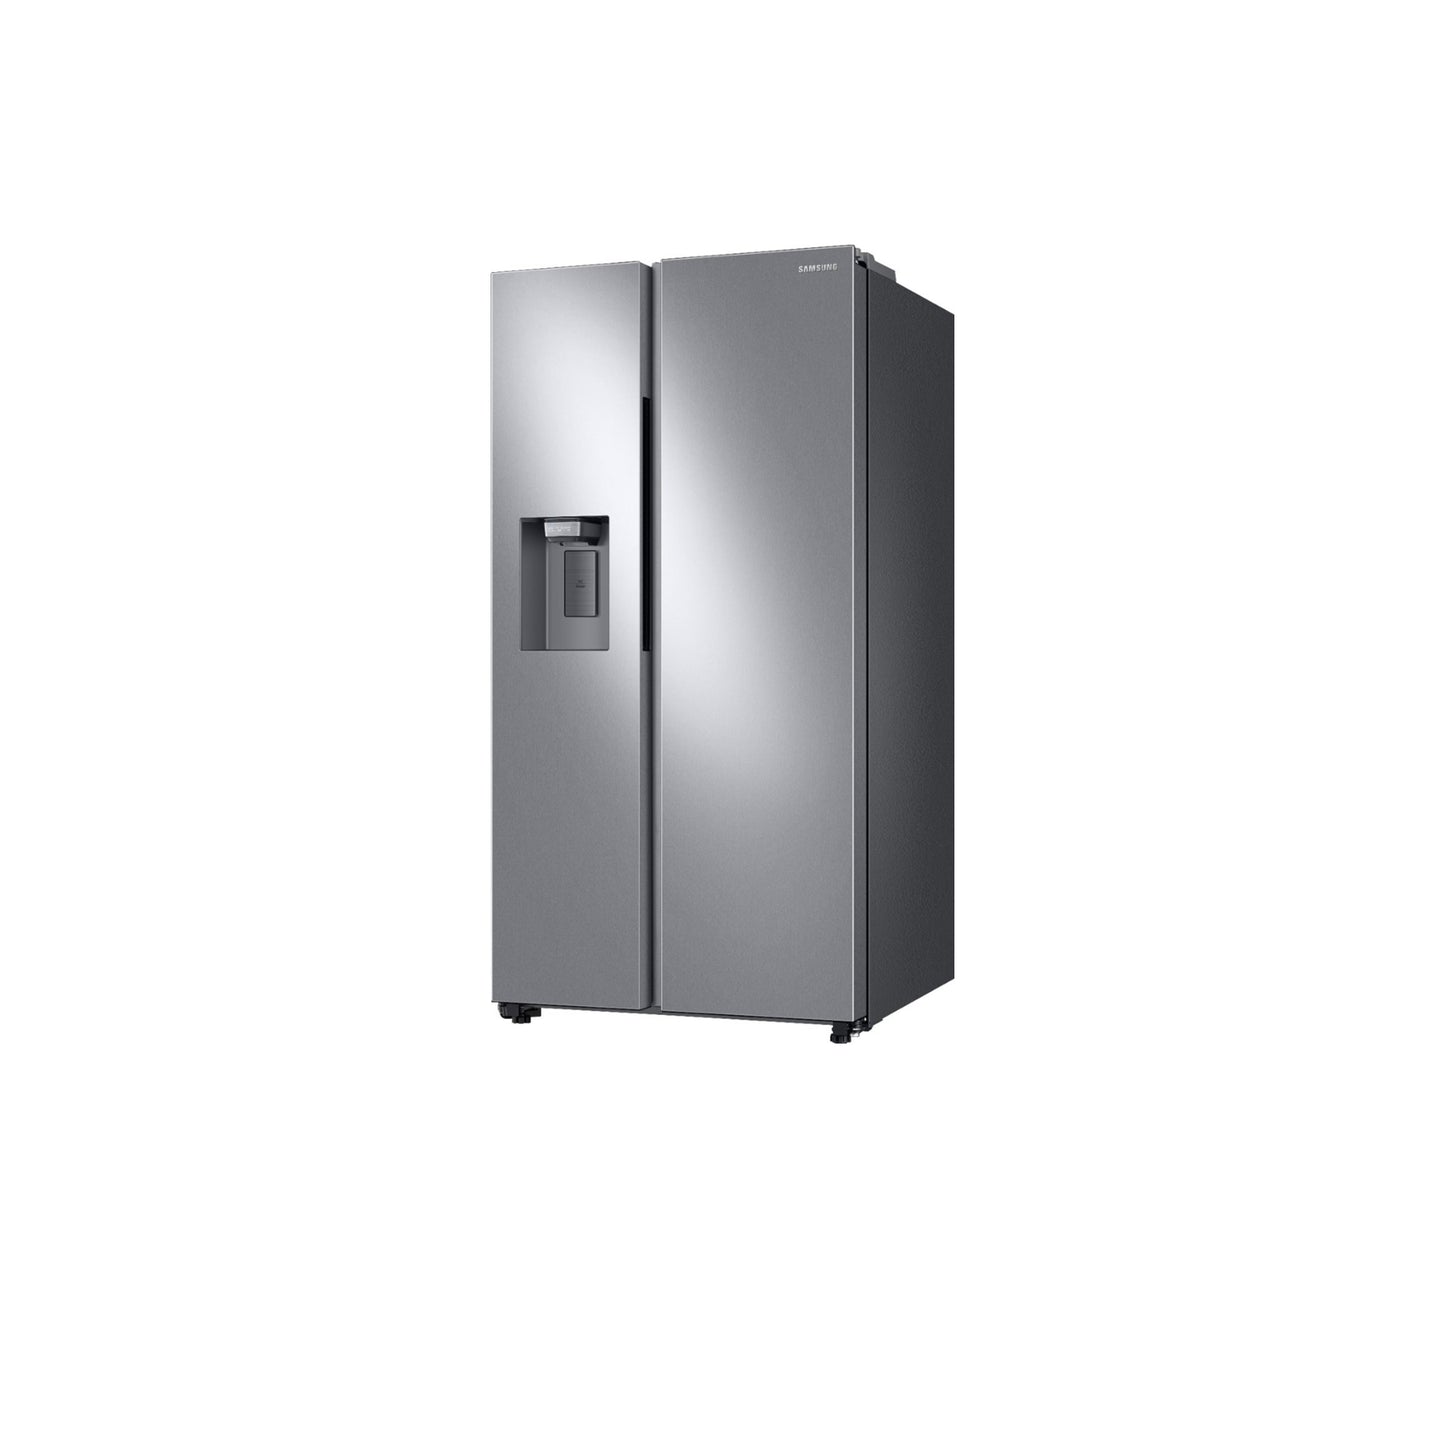 27.4 cu. ft. Large Capacity Side-by-Side Refrigerator in Stainless Steel.